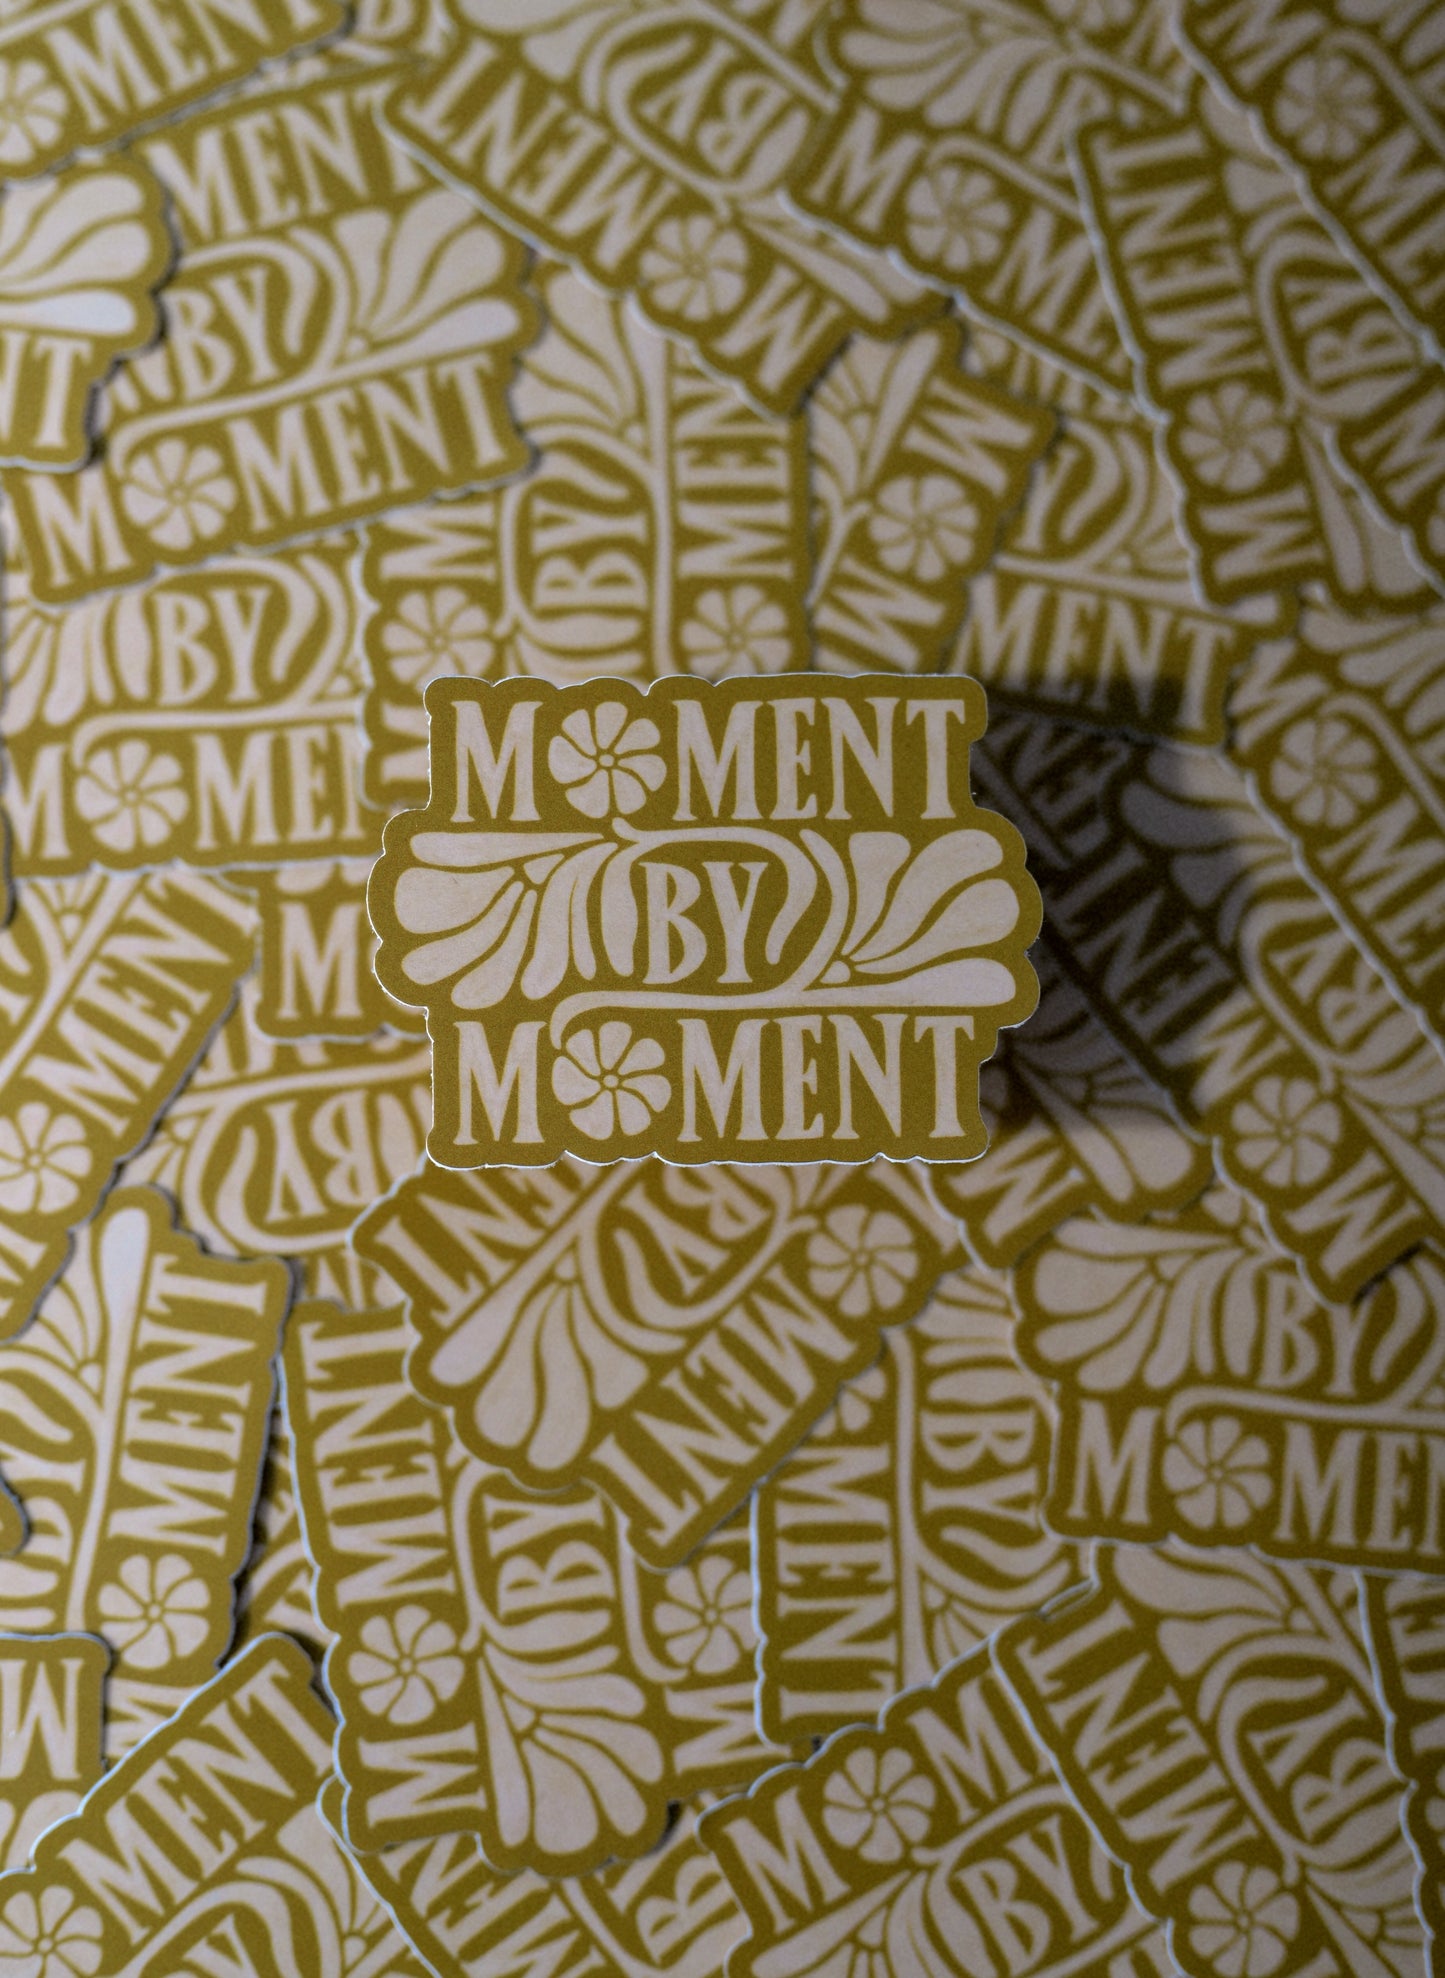 Moment By Moment - Vinyl Sticker